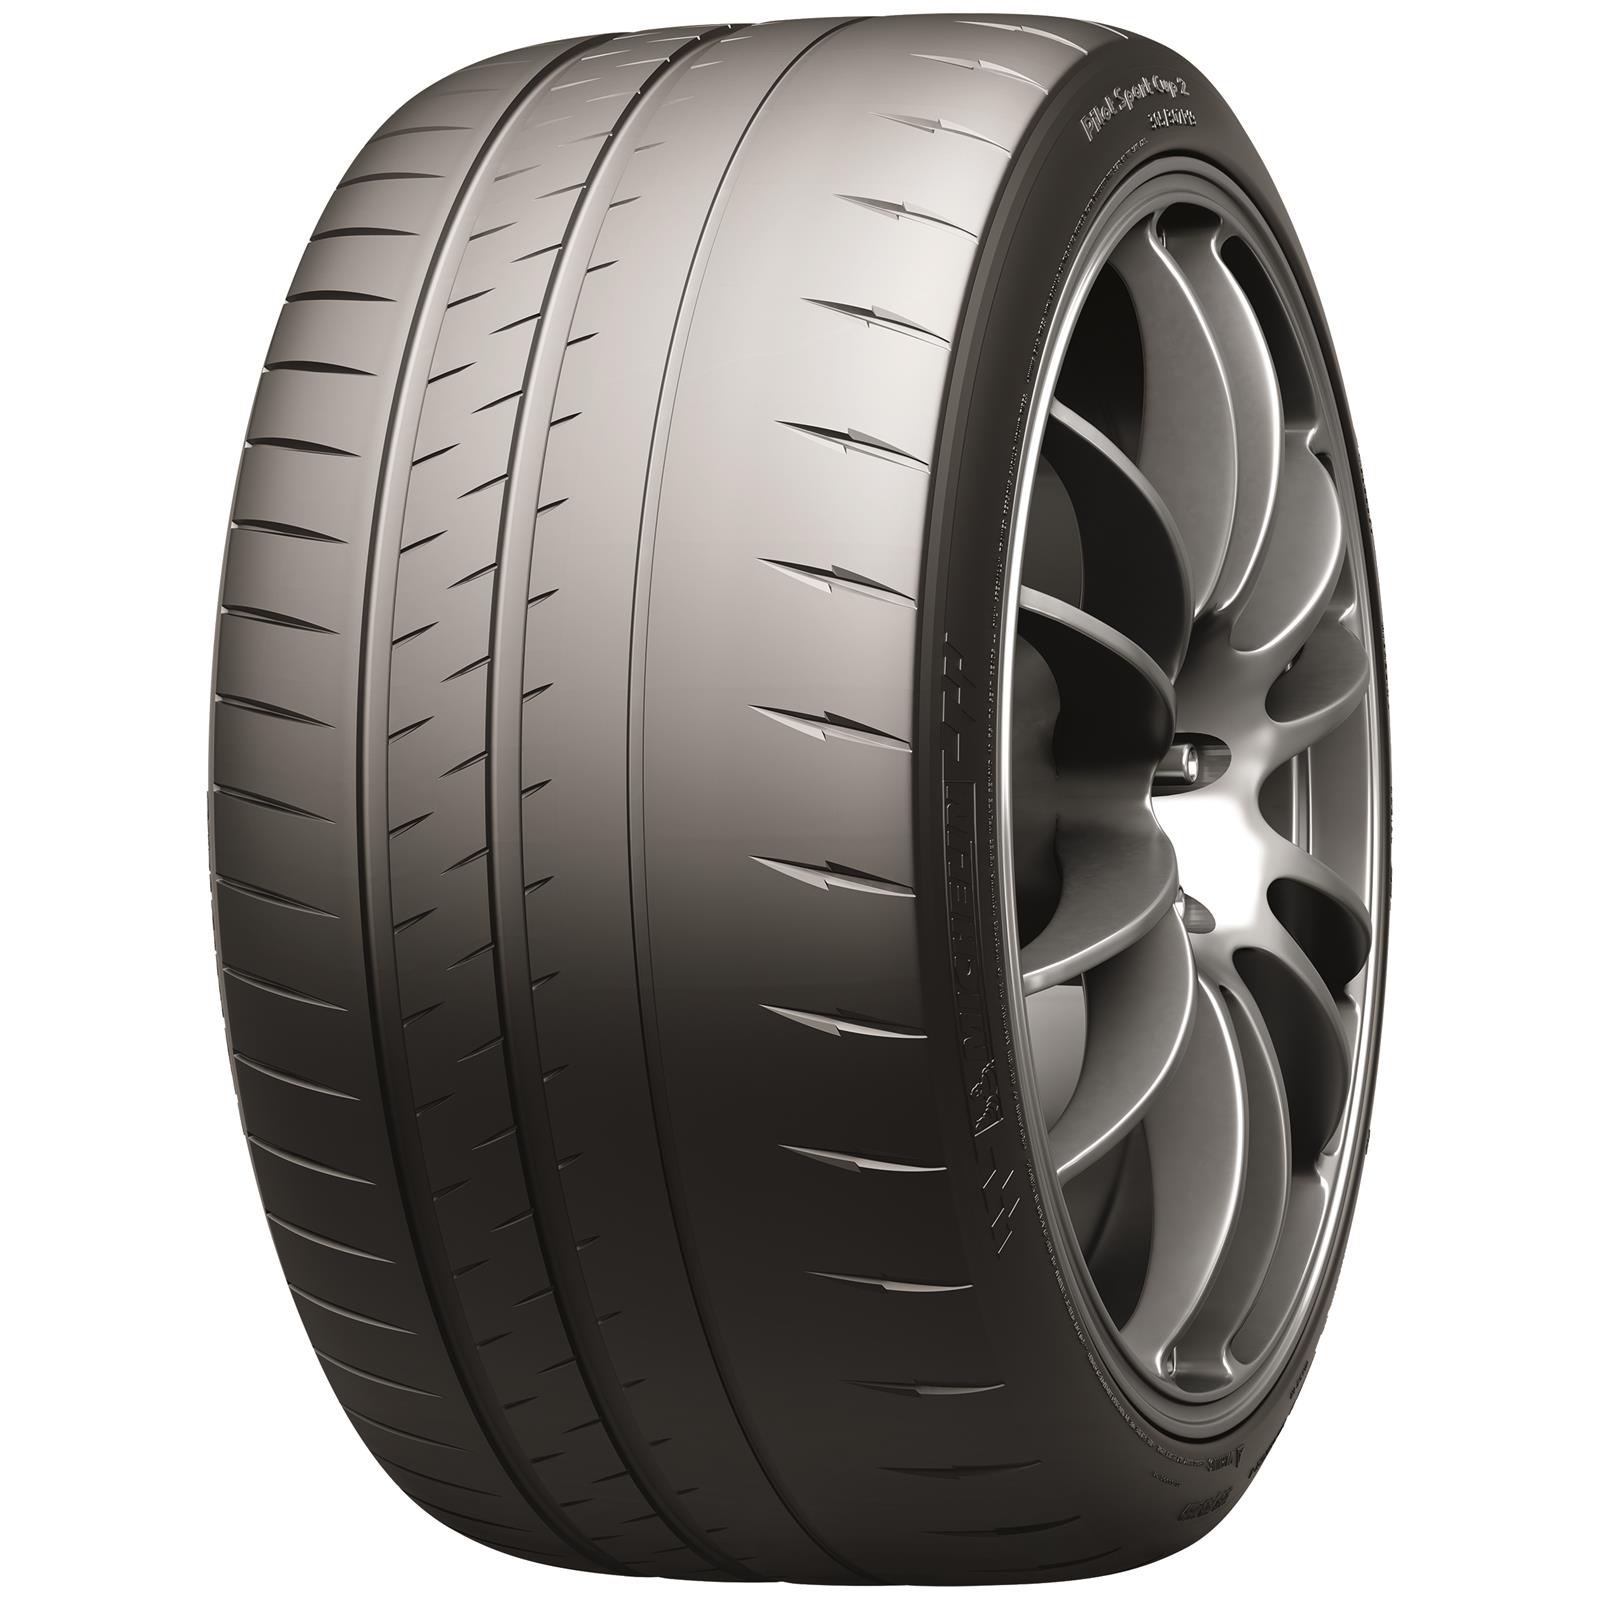 Anvelope auto MICHELIN SPORT CUP 2 MO1 XL MERCEDES 315/30 R21 105Y